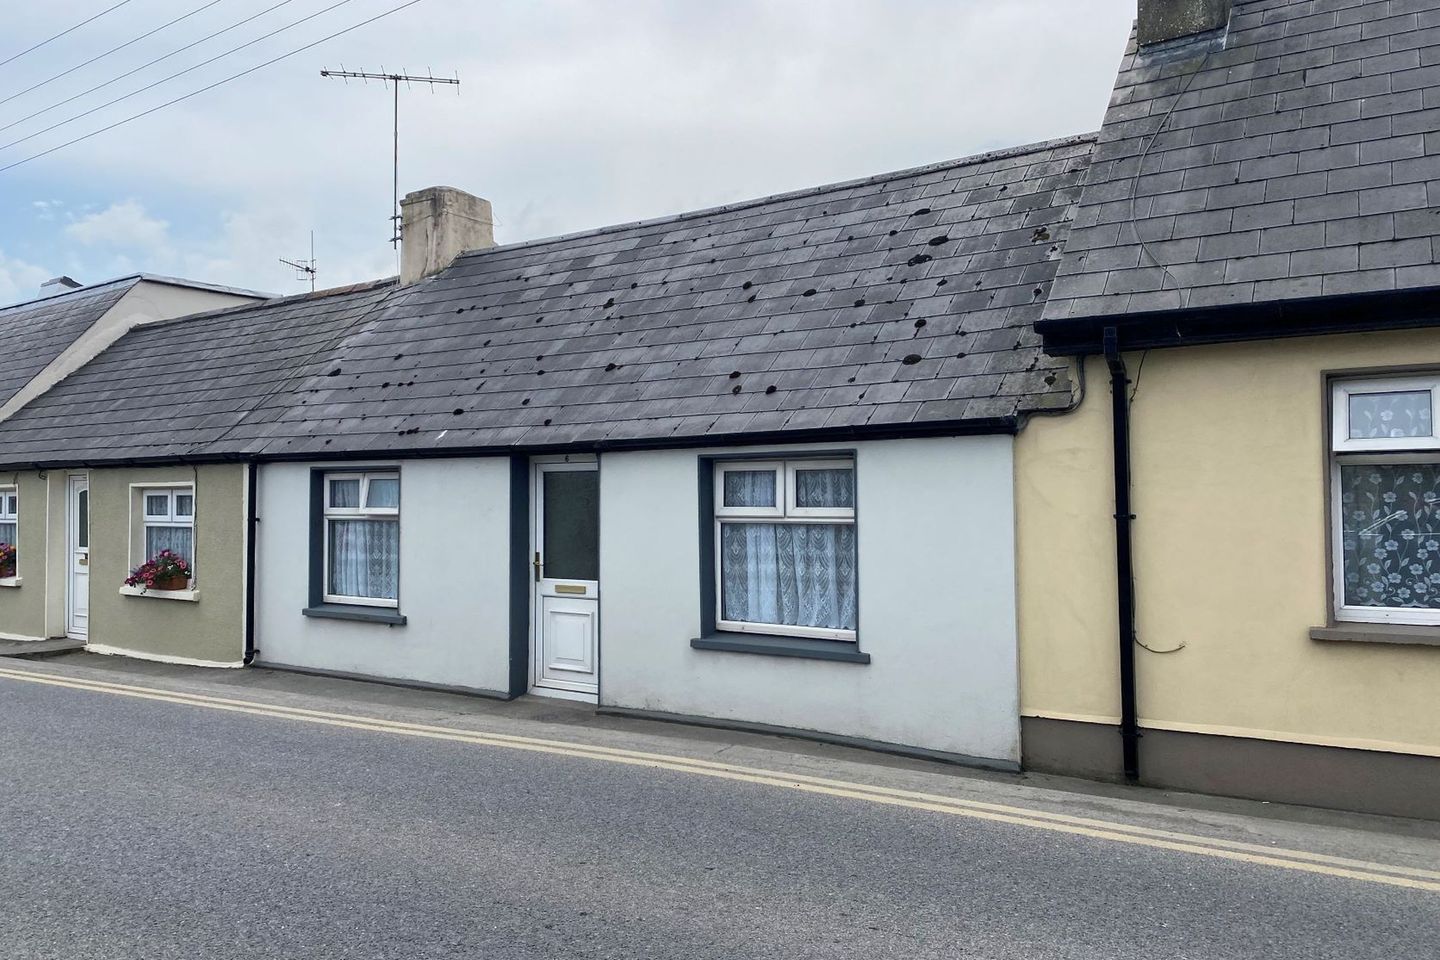 6 Convent Road, Listowel, Co. Kerry